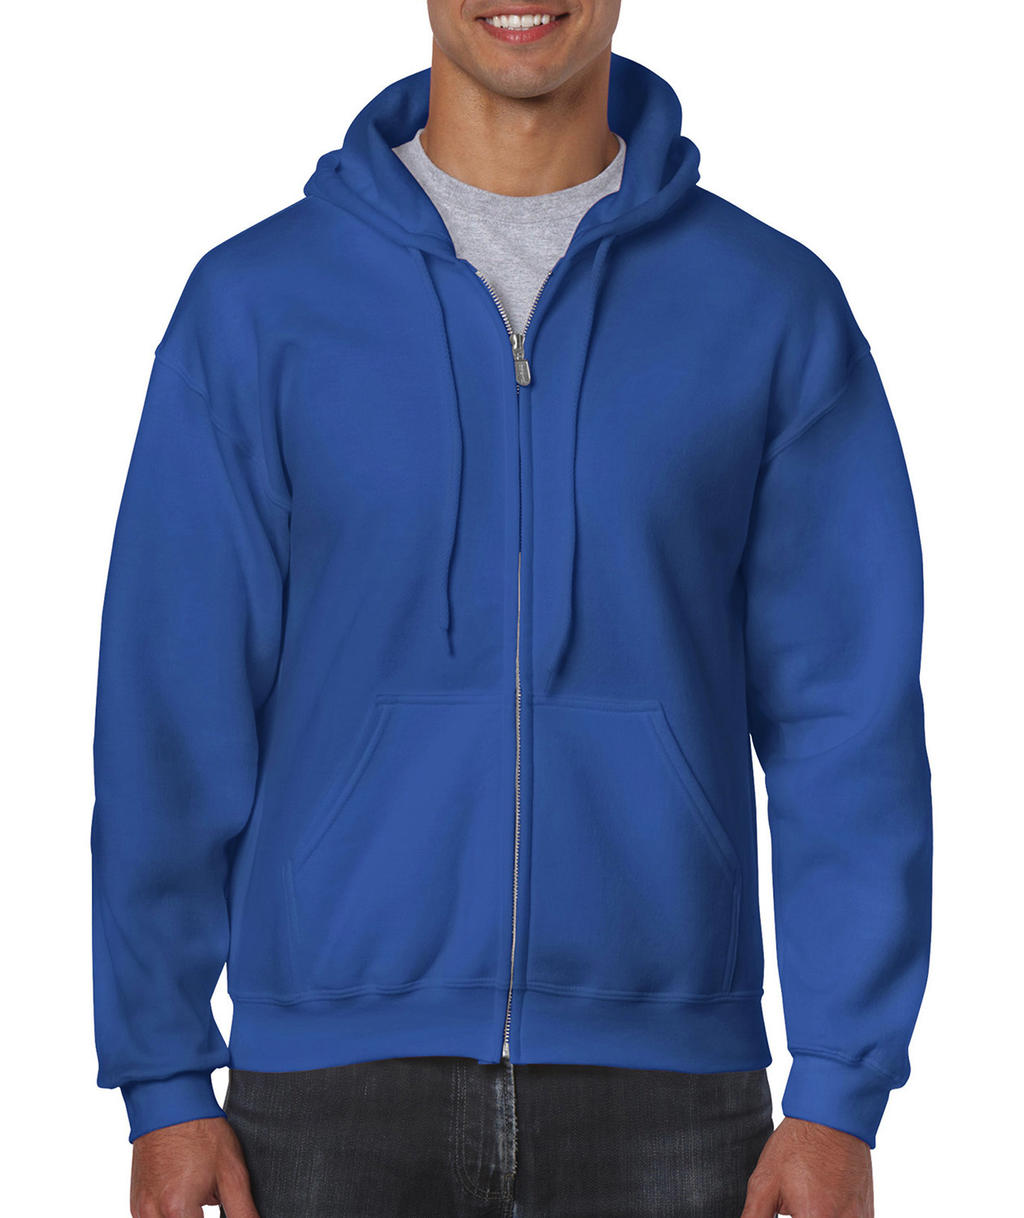  Heavy Blend Adult Full Zip Hooded Sweat in Farbe Royal